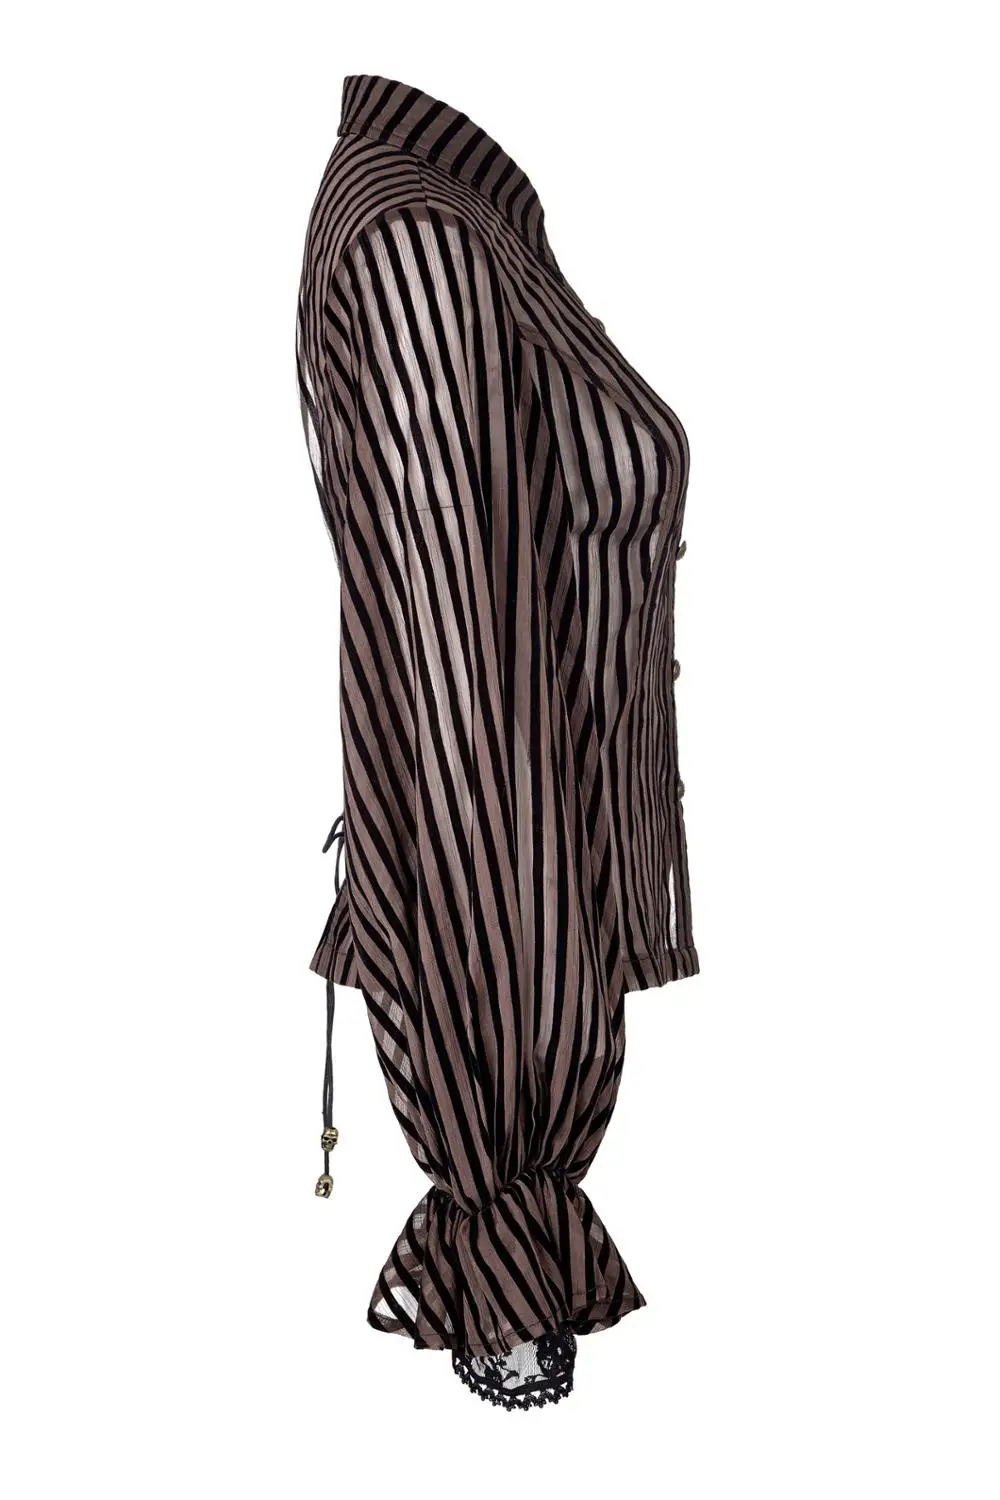 WY-823 Steampunk stylish coffee women see through vertical stripes blouse